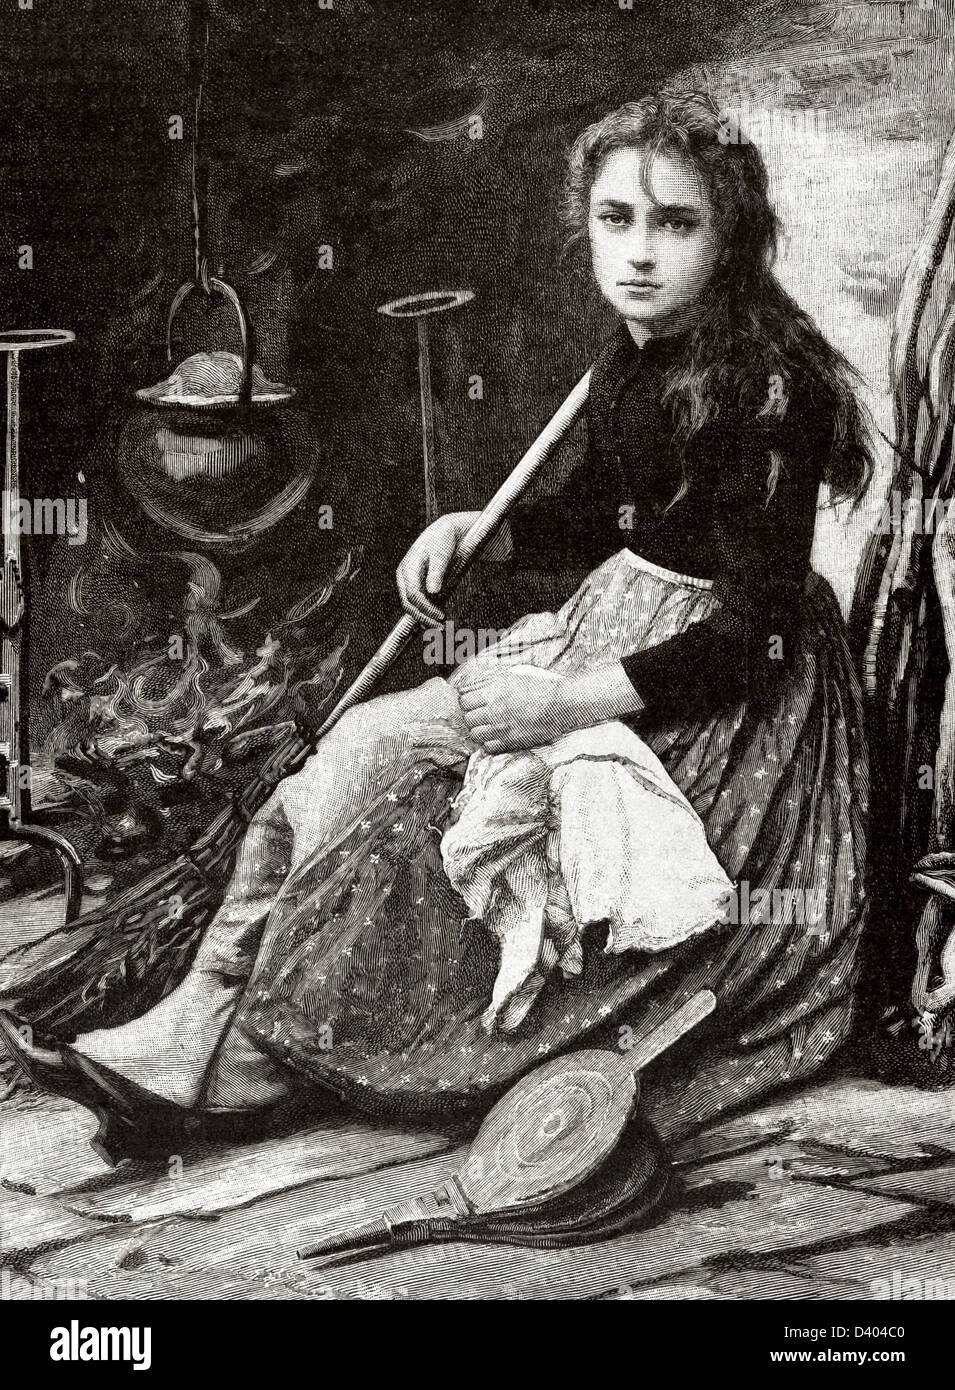 Cinderella. Character in the tale written by Charles Perrault. Engraving in The Iberian Illustration, 1891. Stock Photo